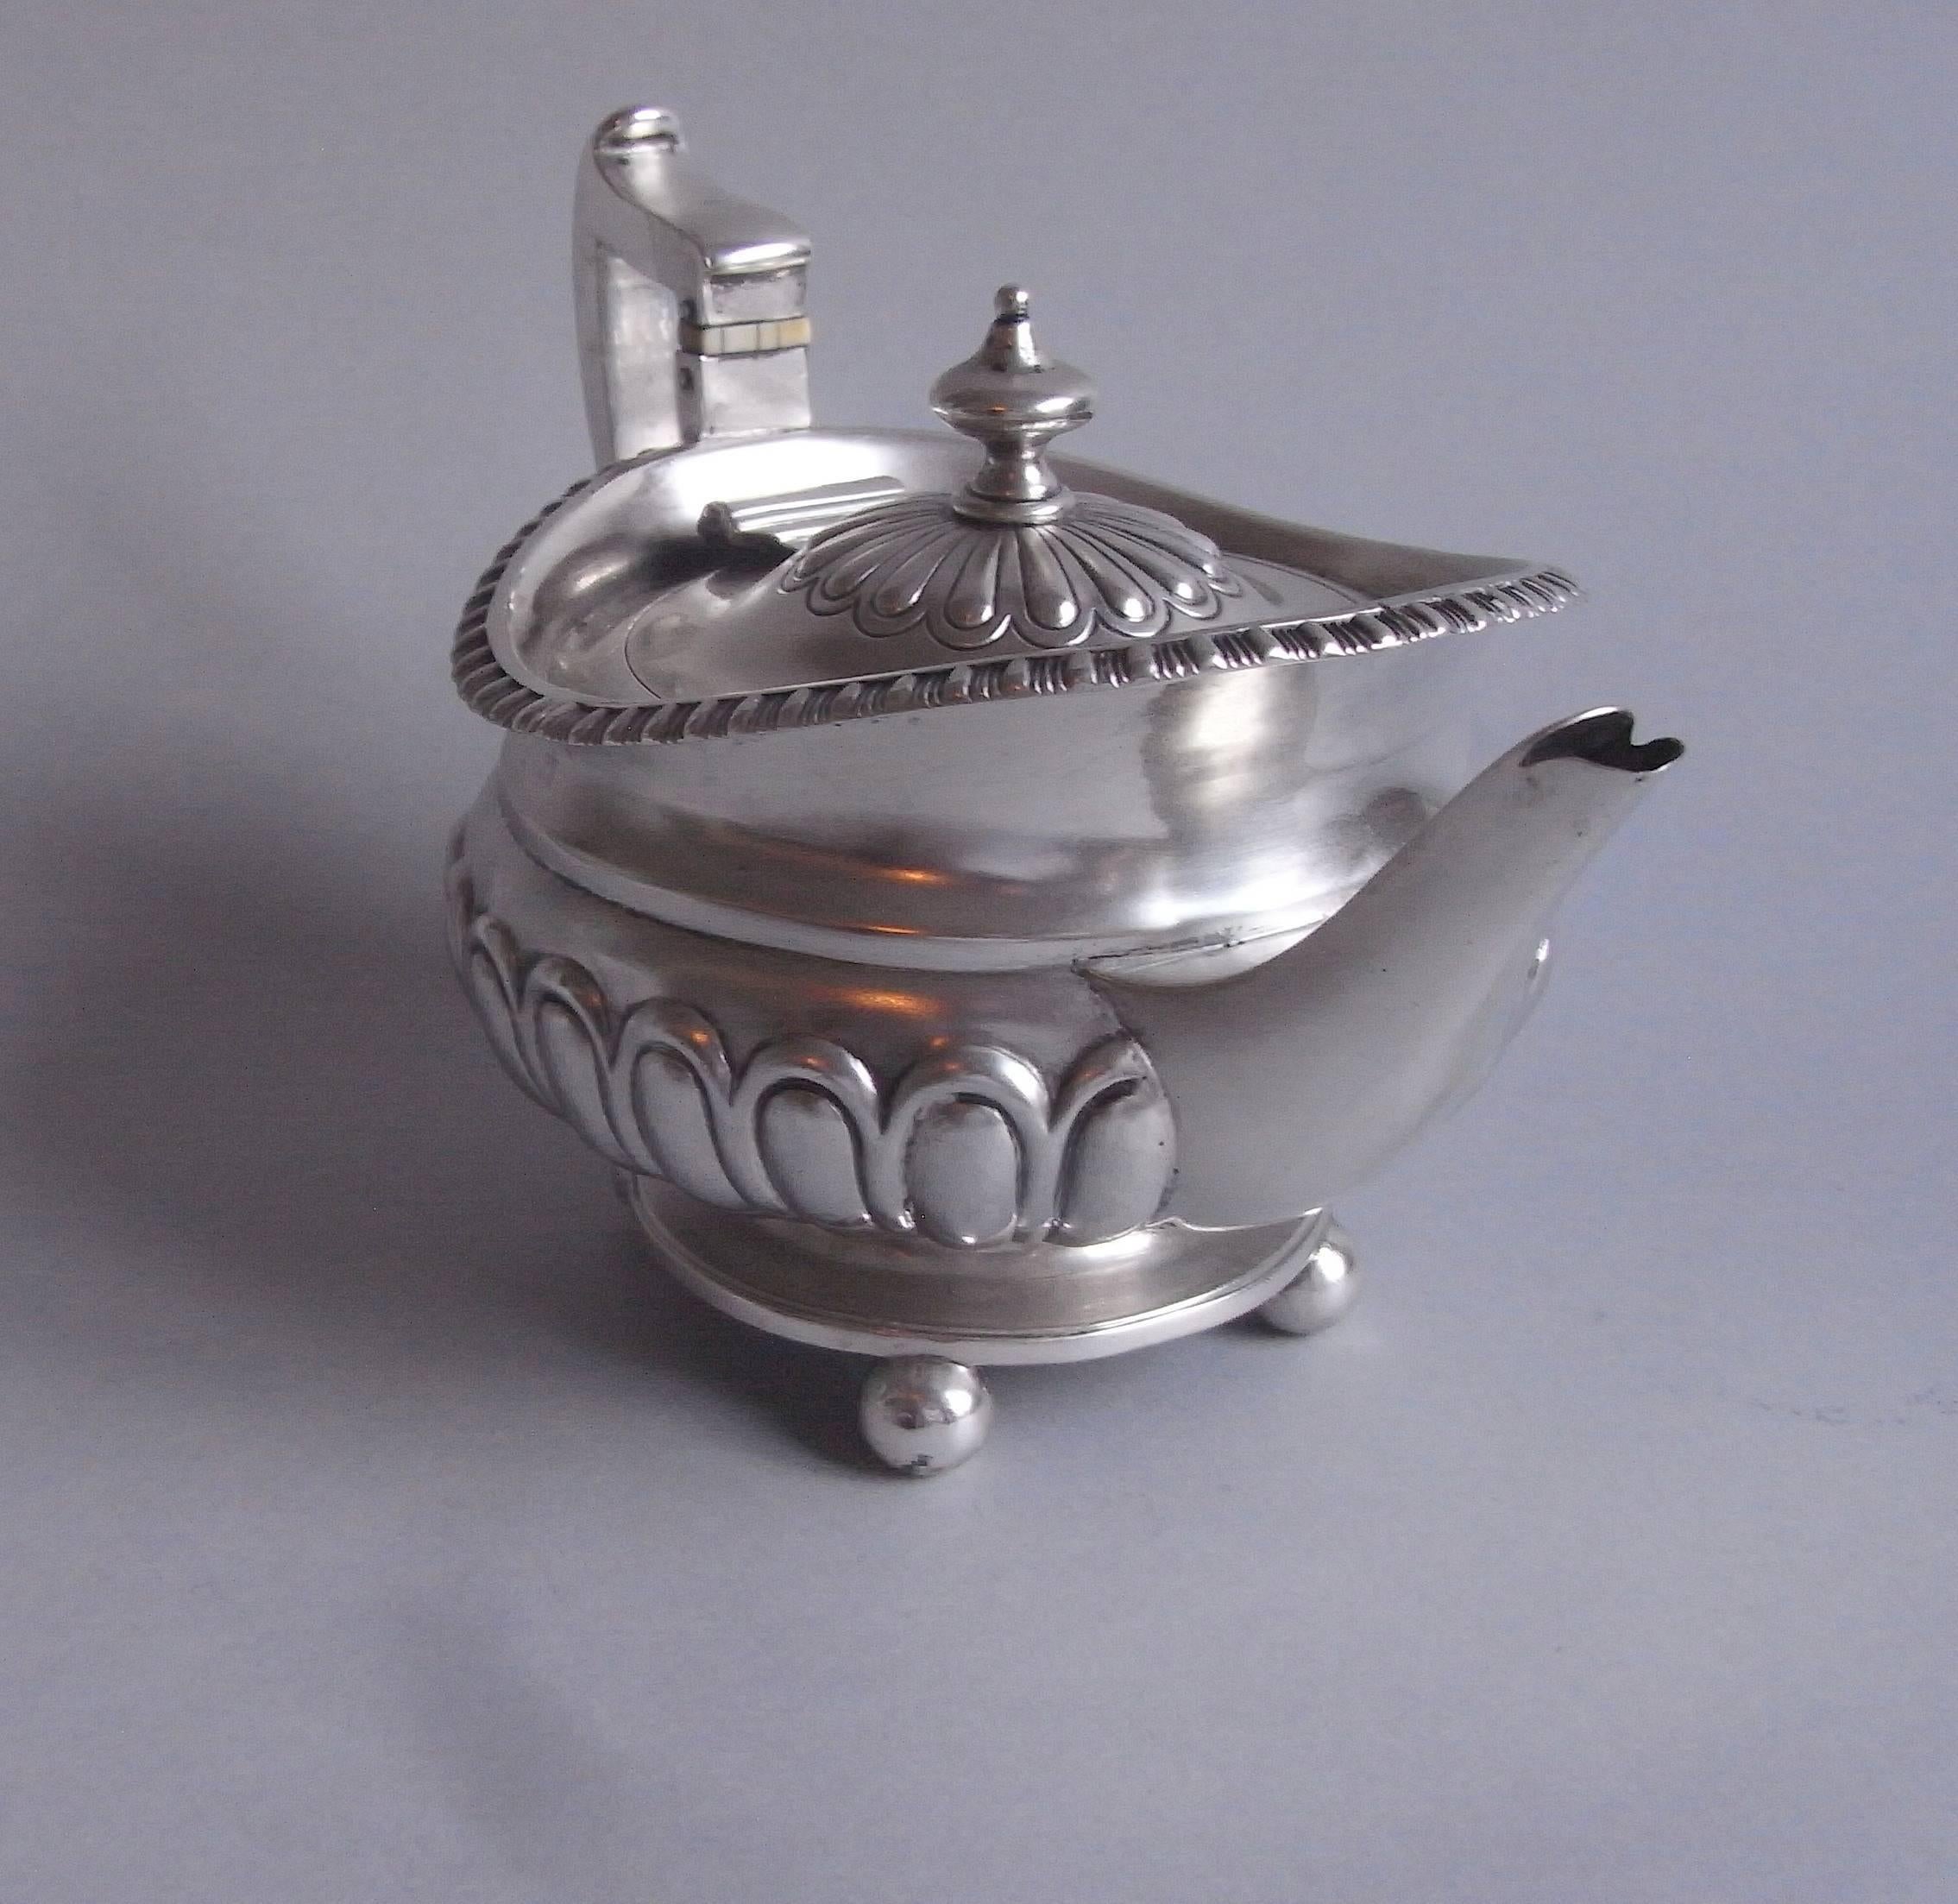 This attractive little pot has a circular platform base which stands on four ball feet. The baluster shaped main body is decorated with a wide lobed band which rises to an everted gadrooned rim. The design is without doubt a Scottish interpretation